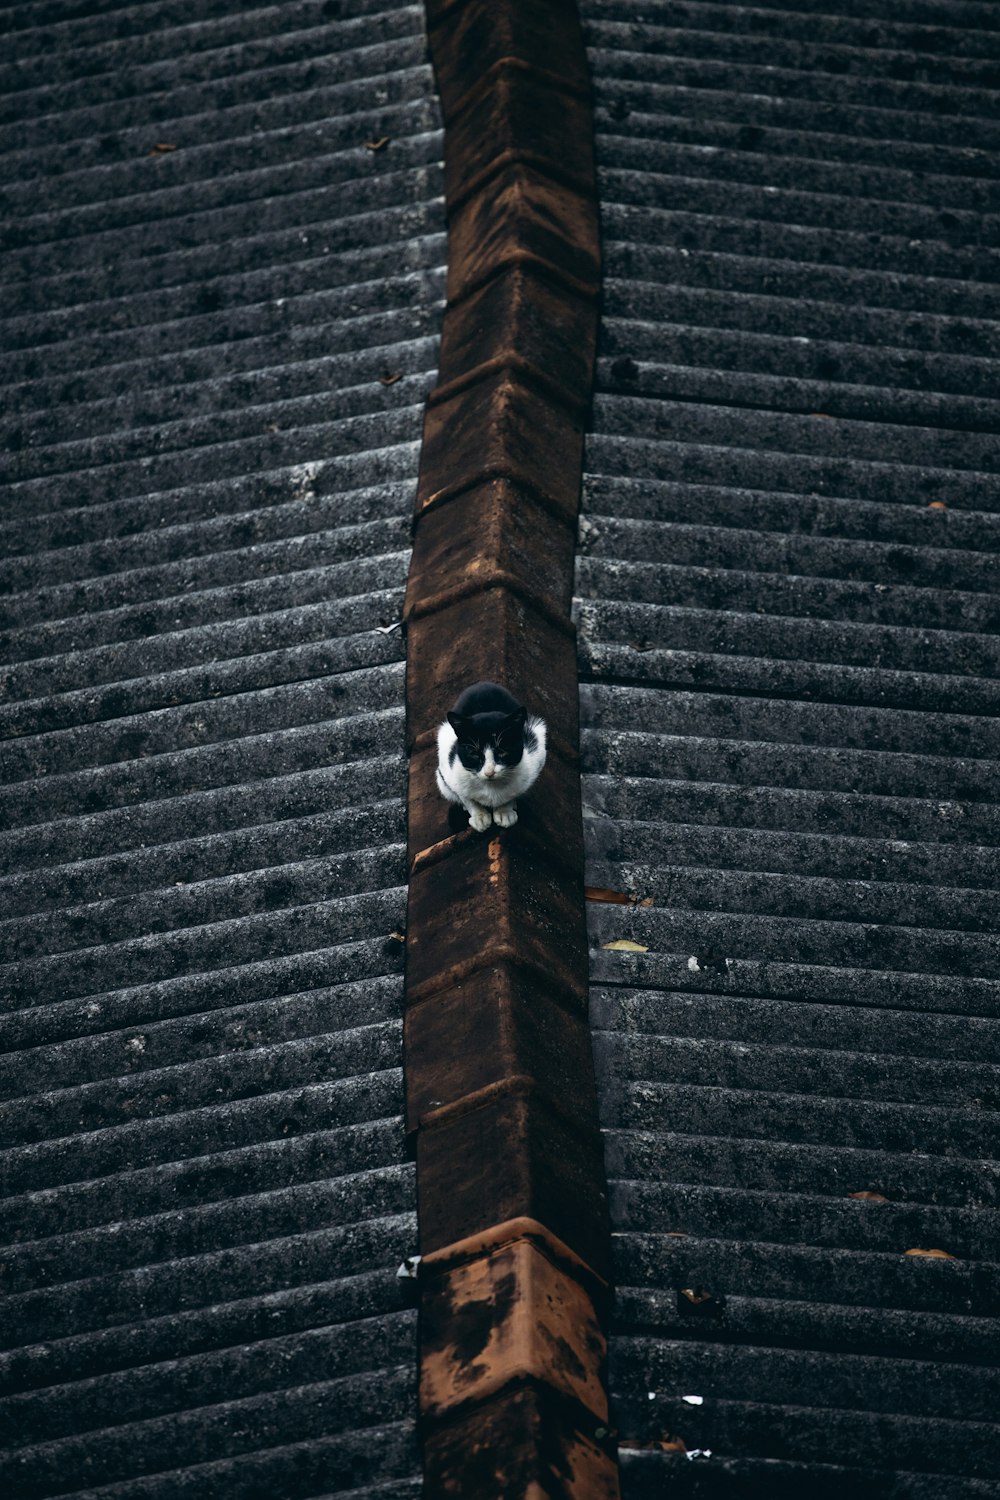 a black and white cat sitting on top of a wooden pole